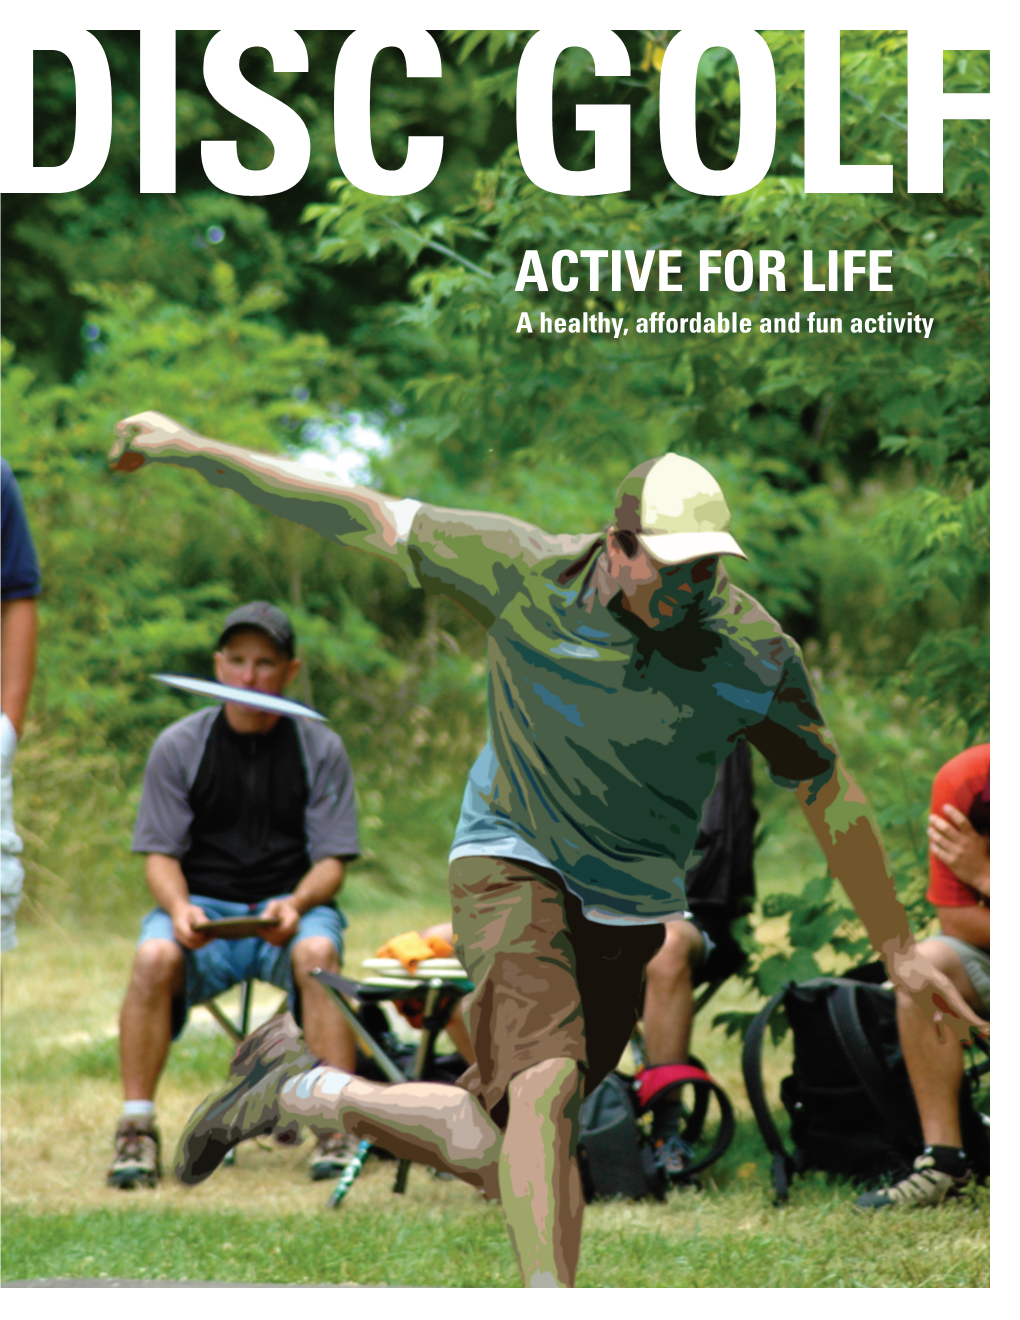 ACTIVE for LIFE a Healthy, Affordable and Fun Activity What Is Disc Golf? the History of Disc Golf Disc Golf Is Played Like Traditional Golf